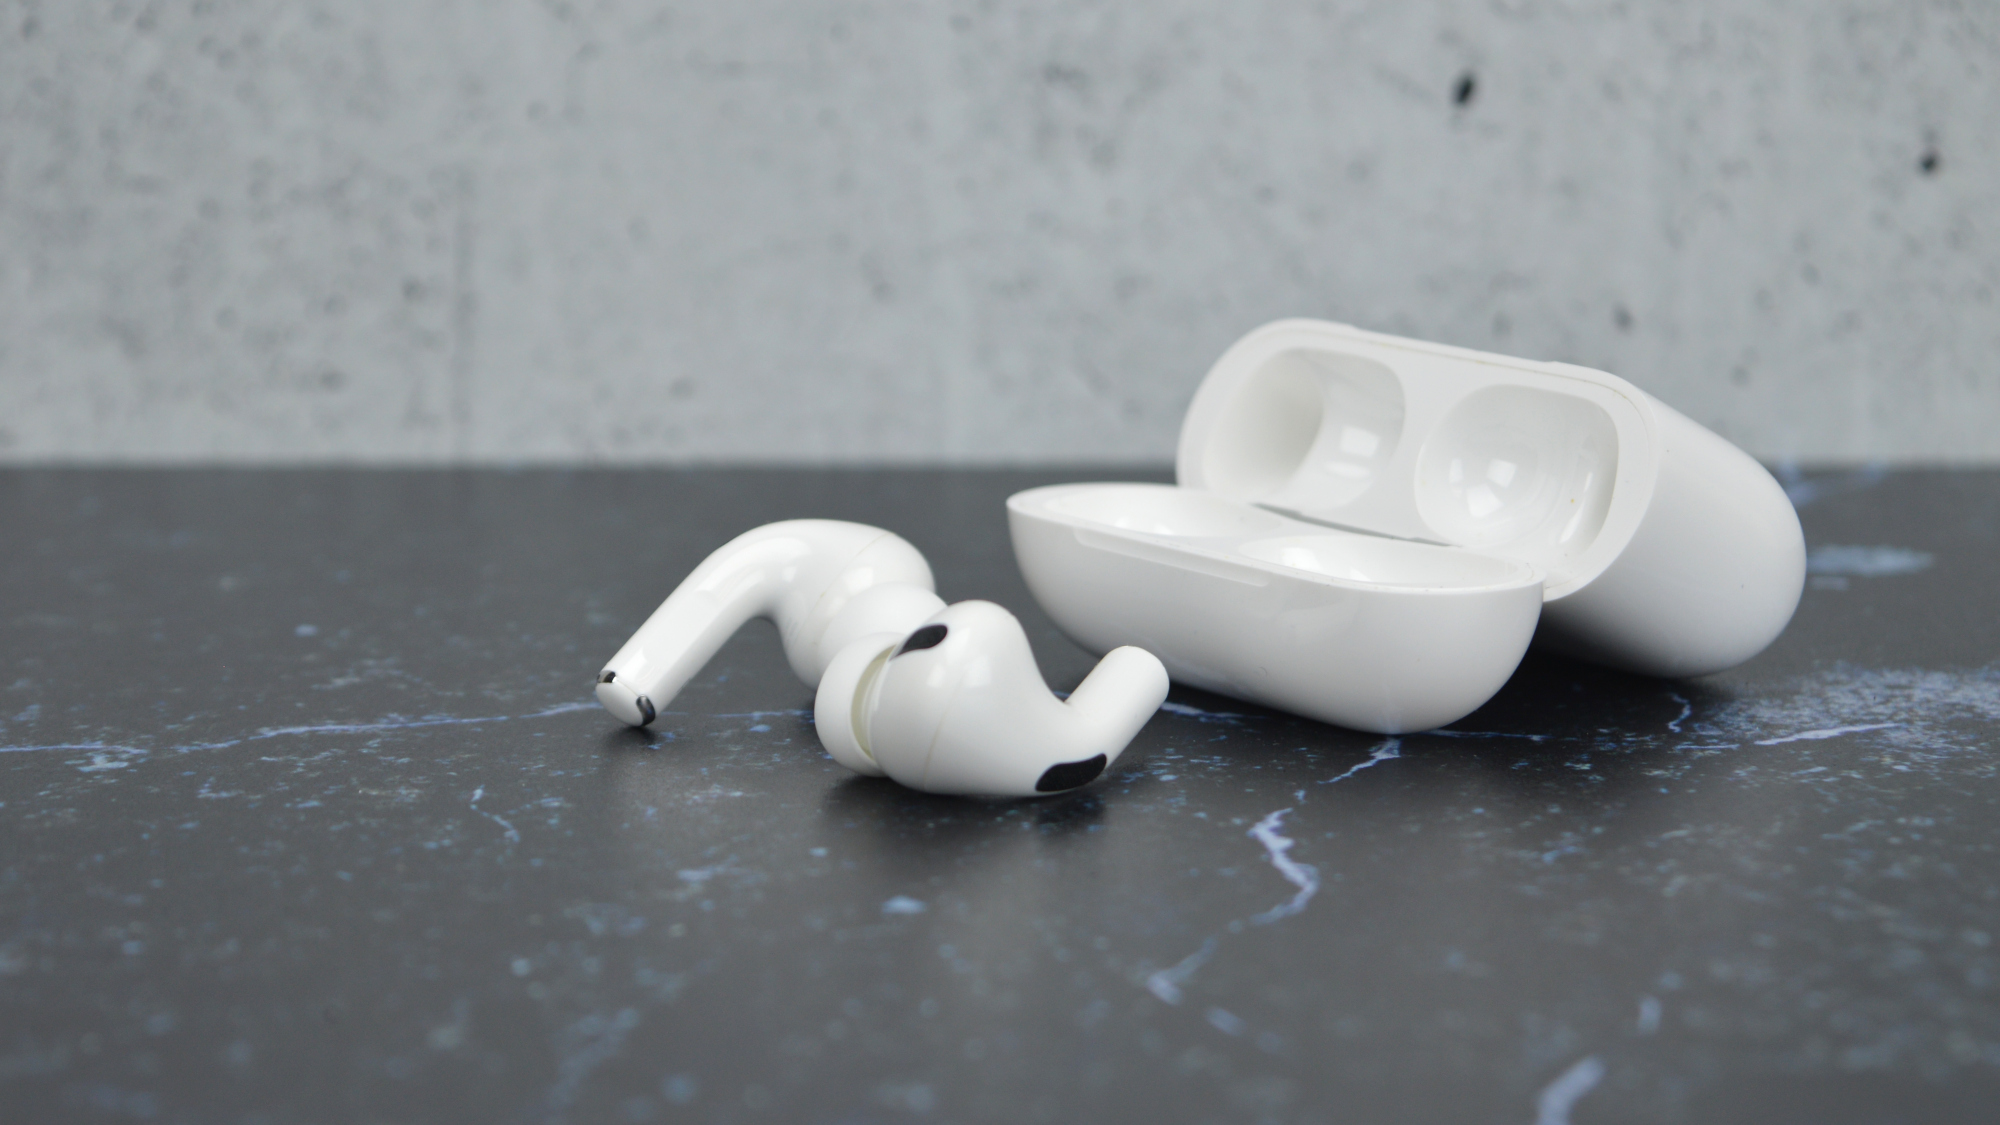 Apple's AirPods Pro on a table